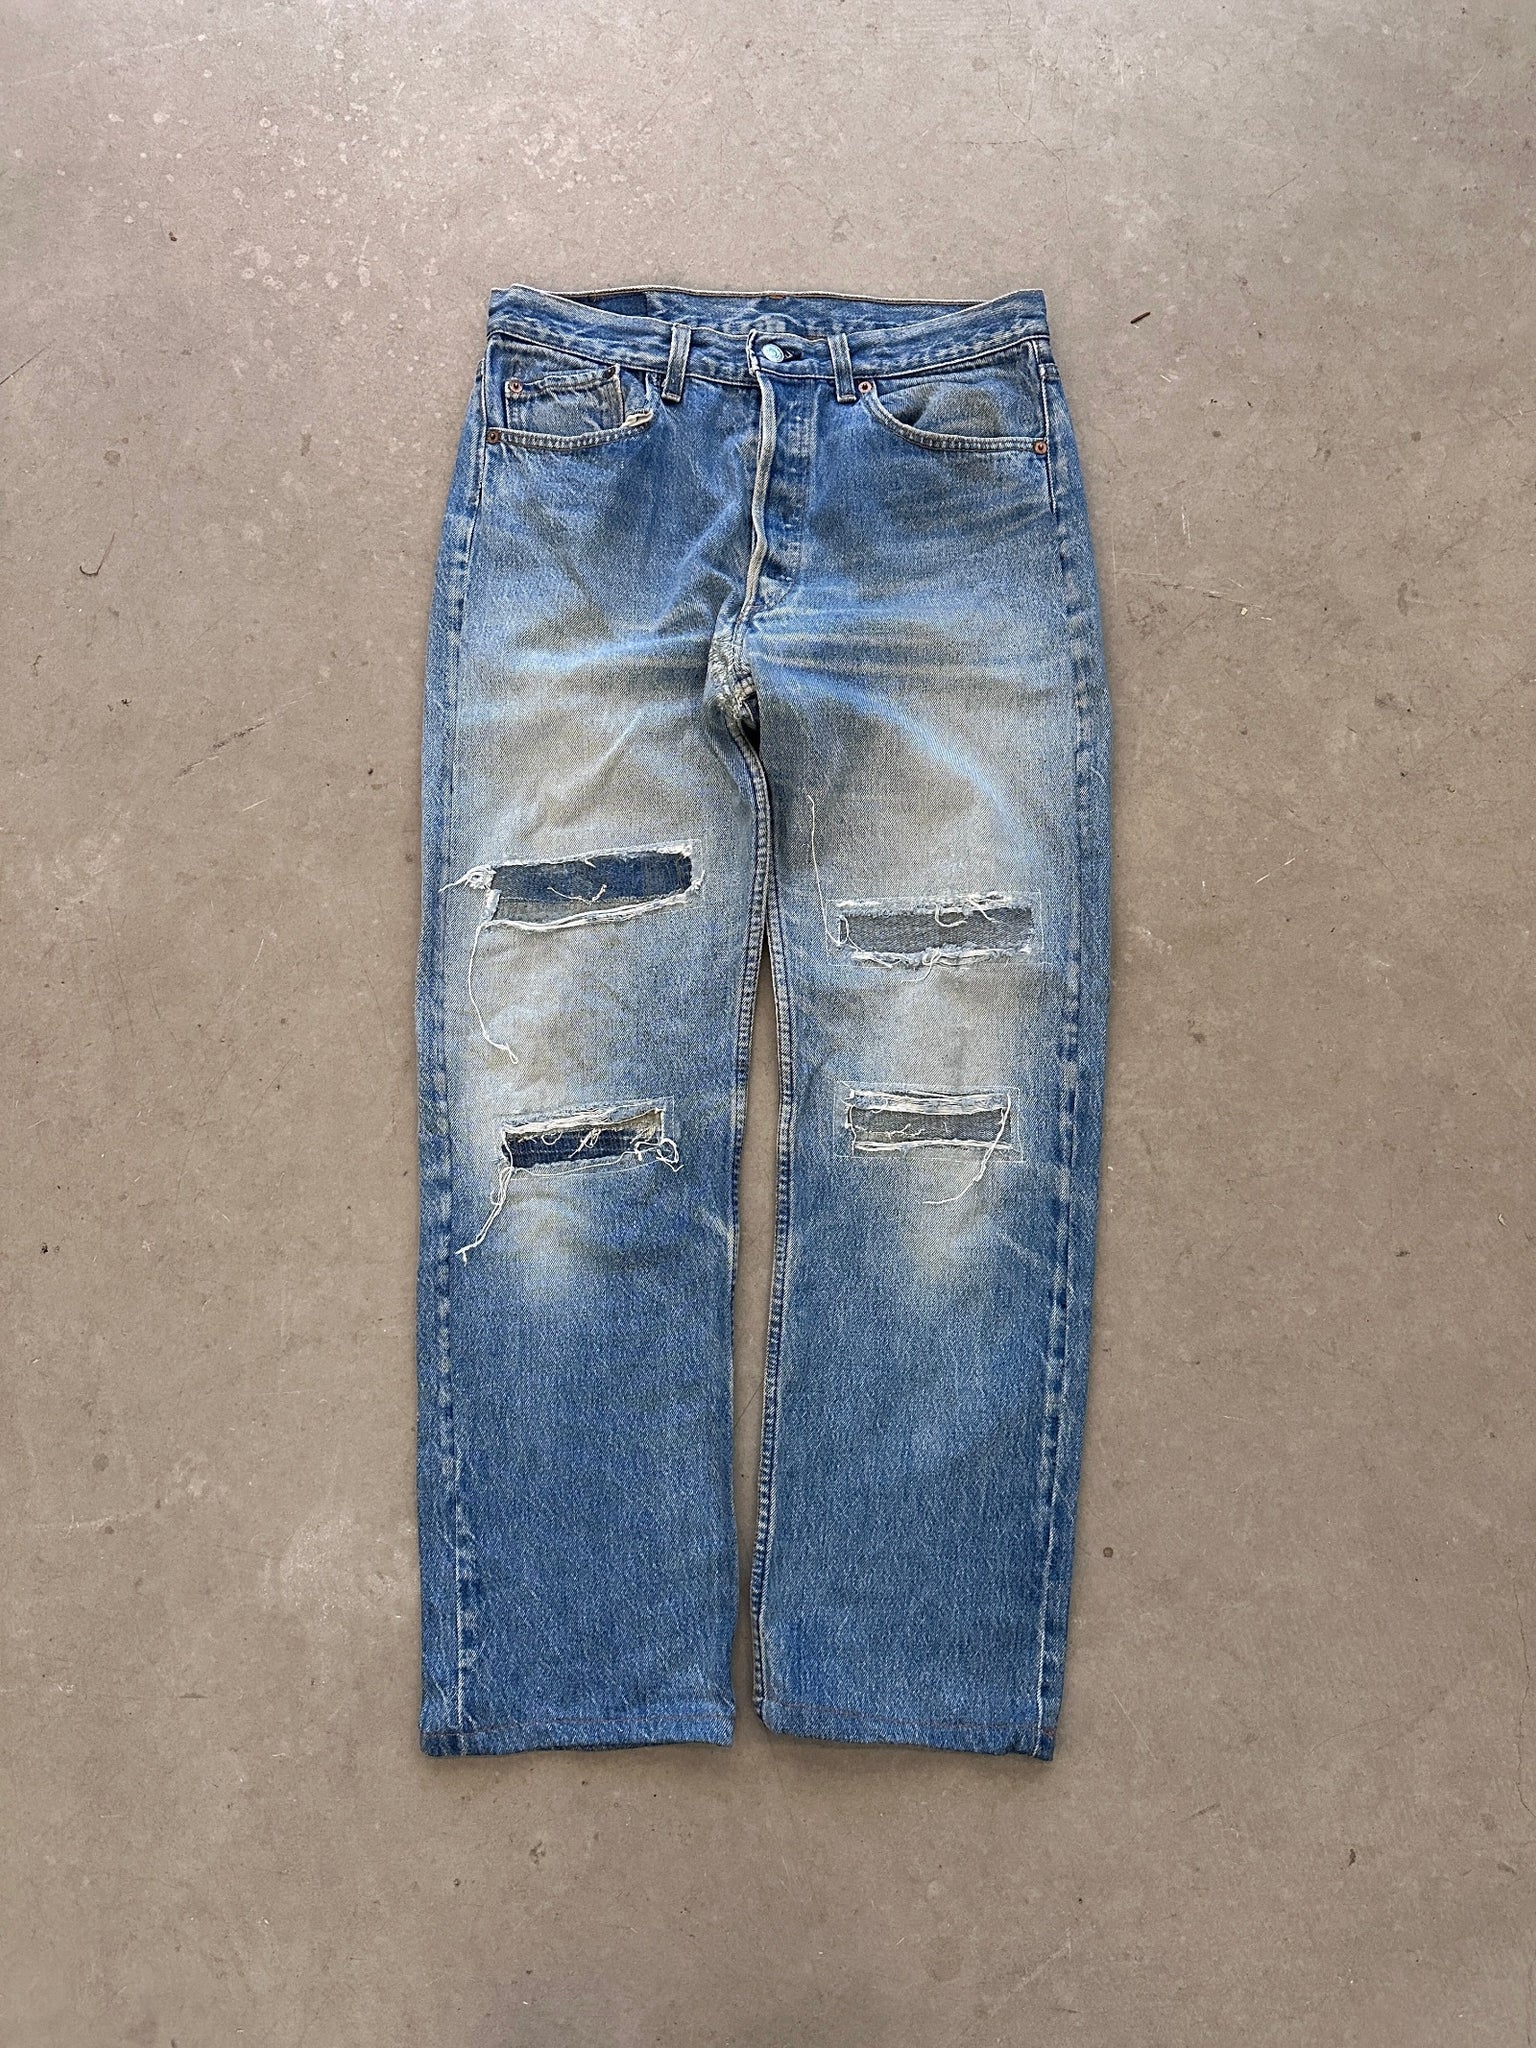 1990's Levi's 501 Repaired Jeans - 33 x 38